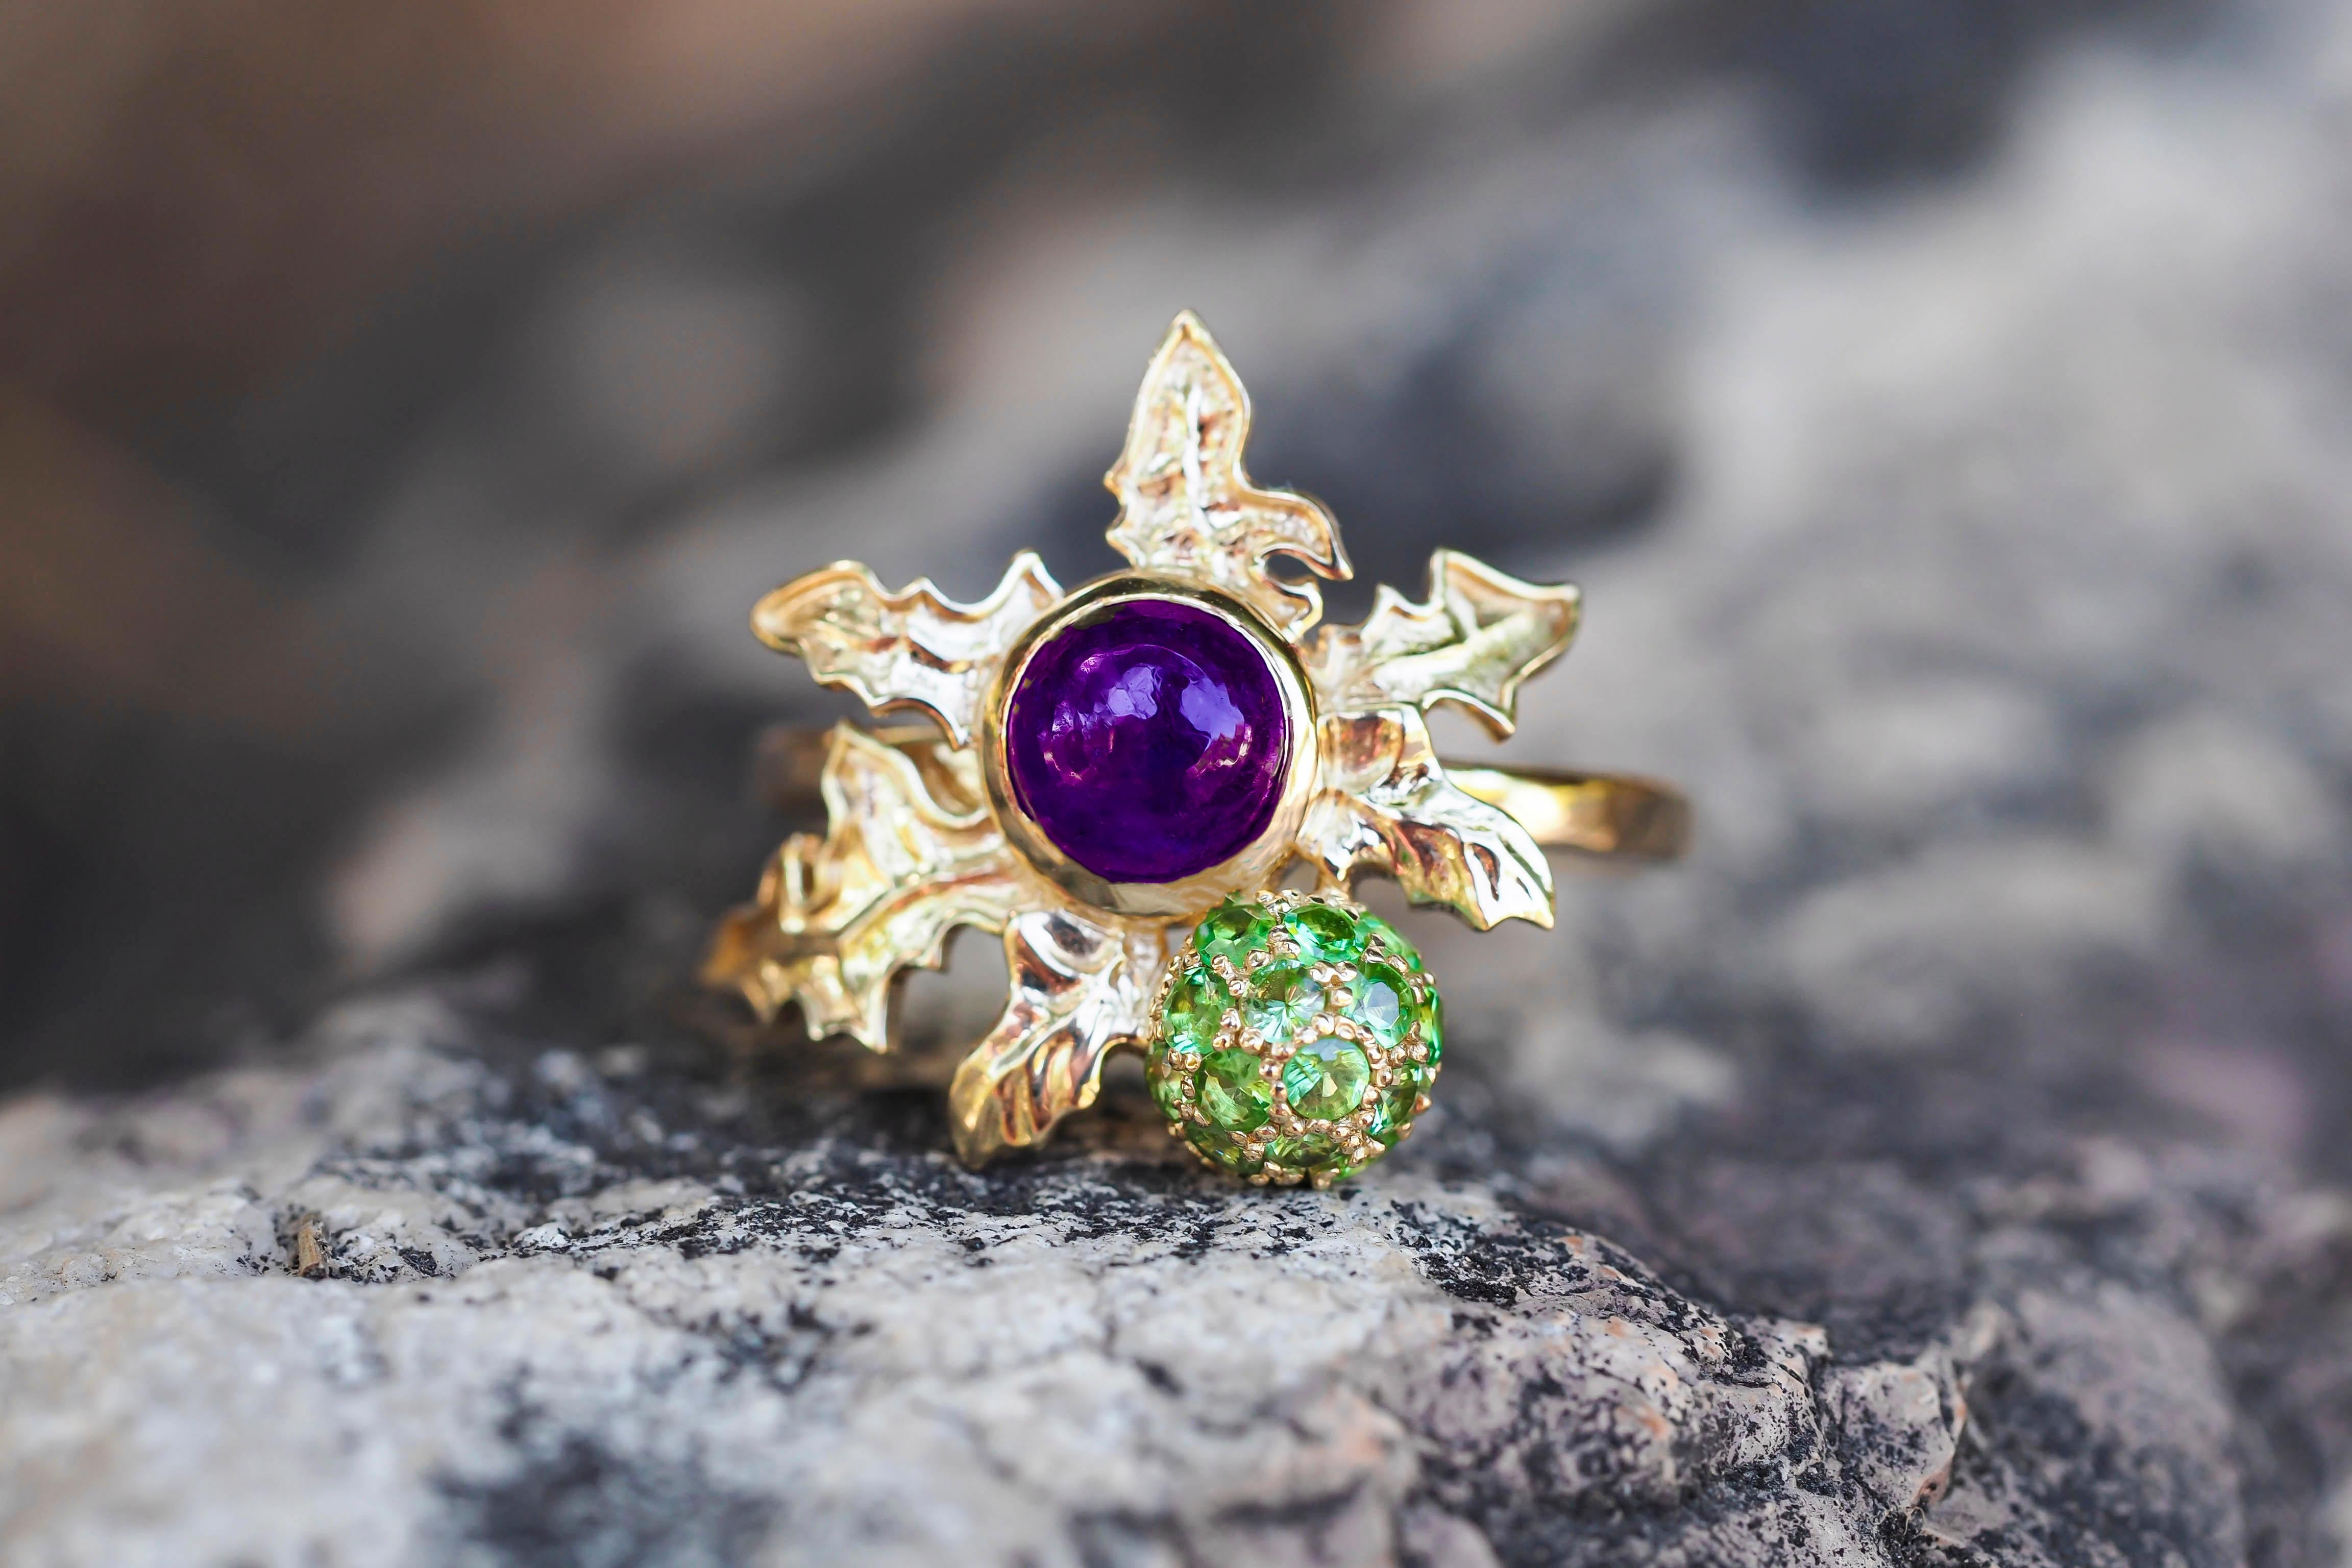 For Sale:  14 K Gold Scottish Thistle Ring with Amethyst and Peridots! 10